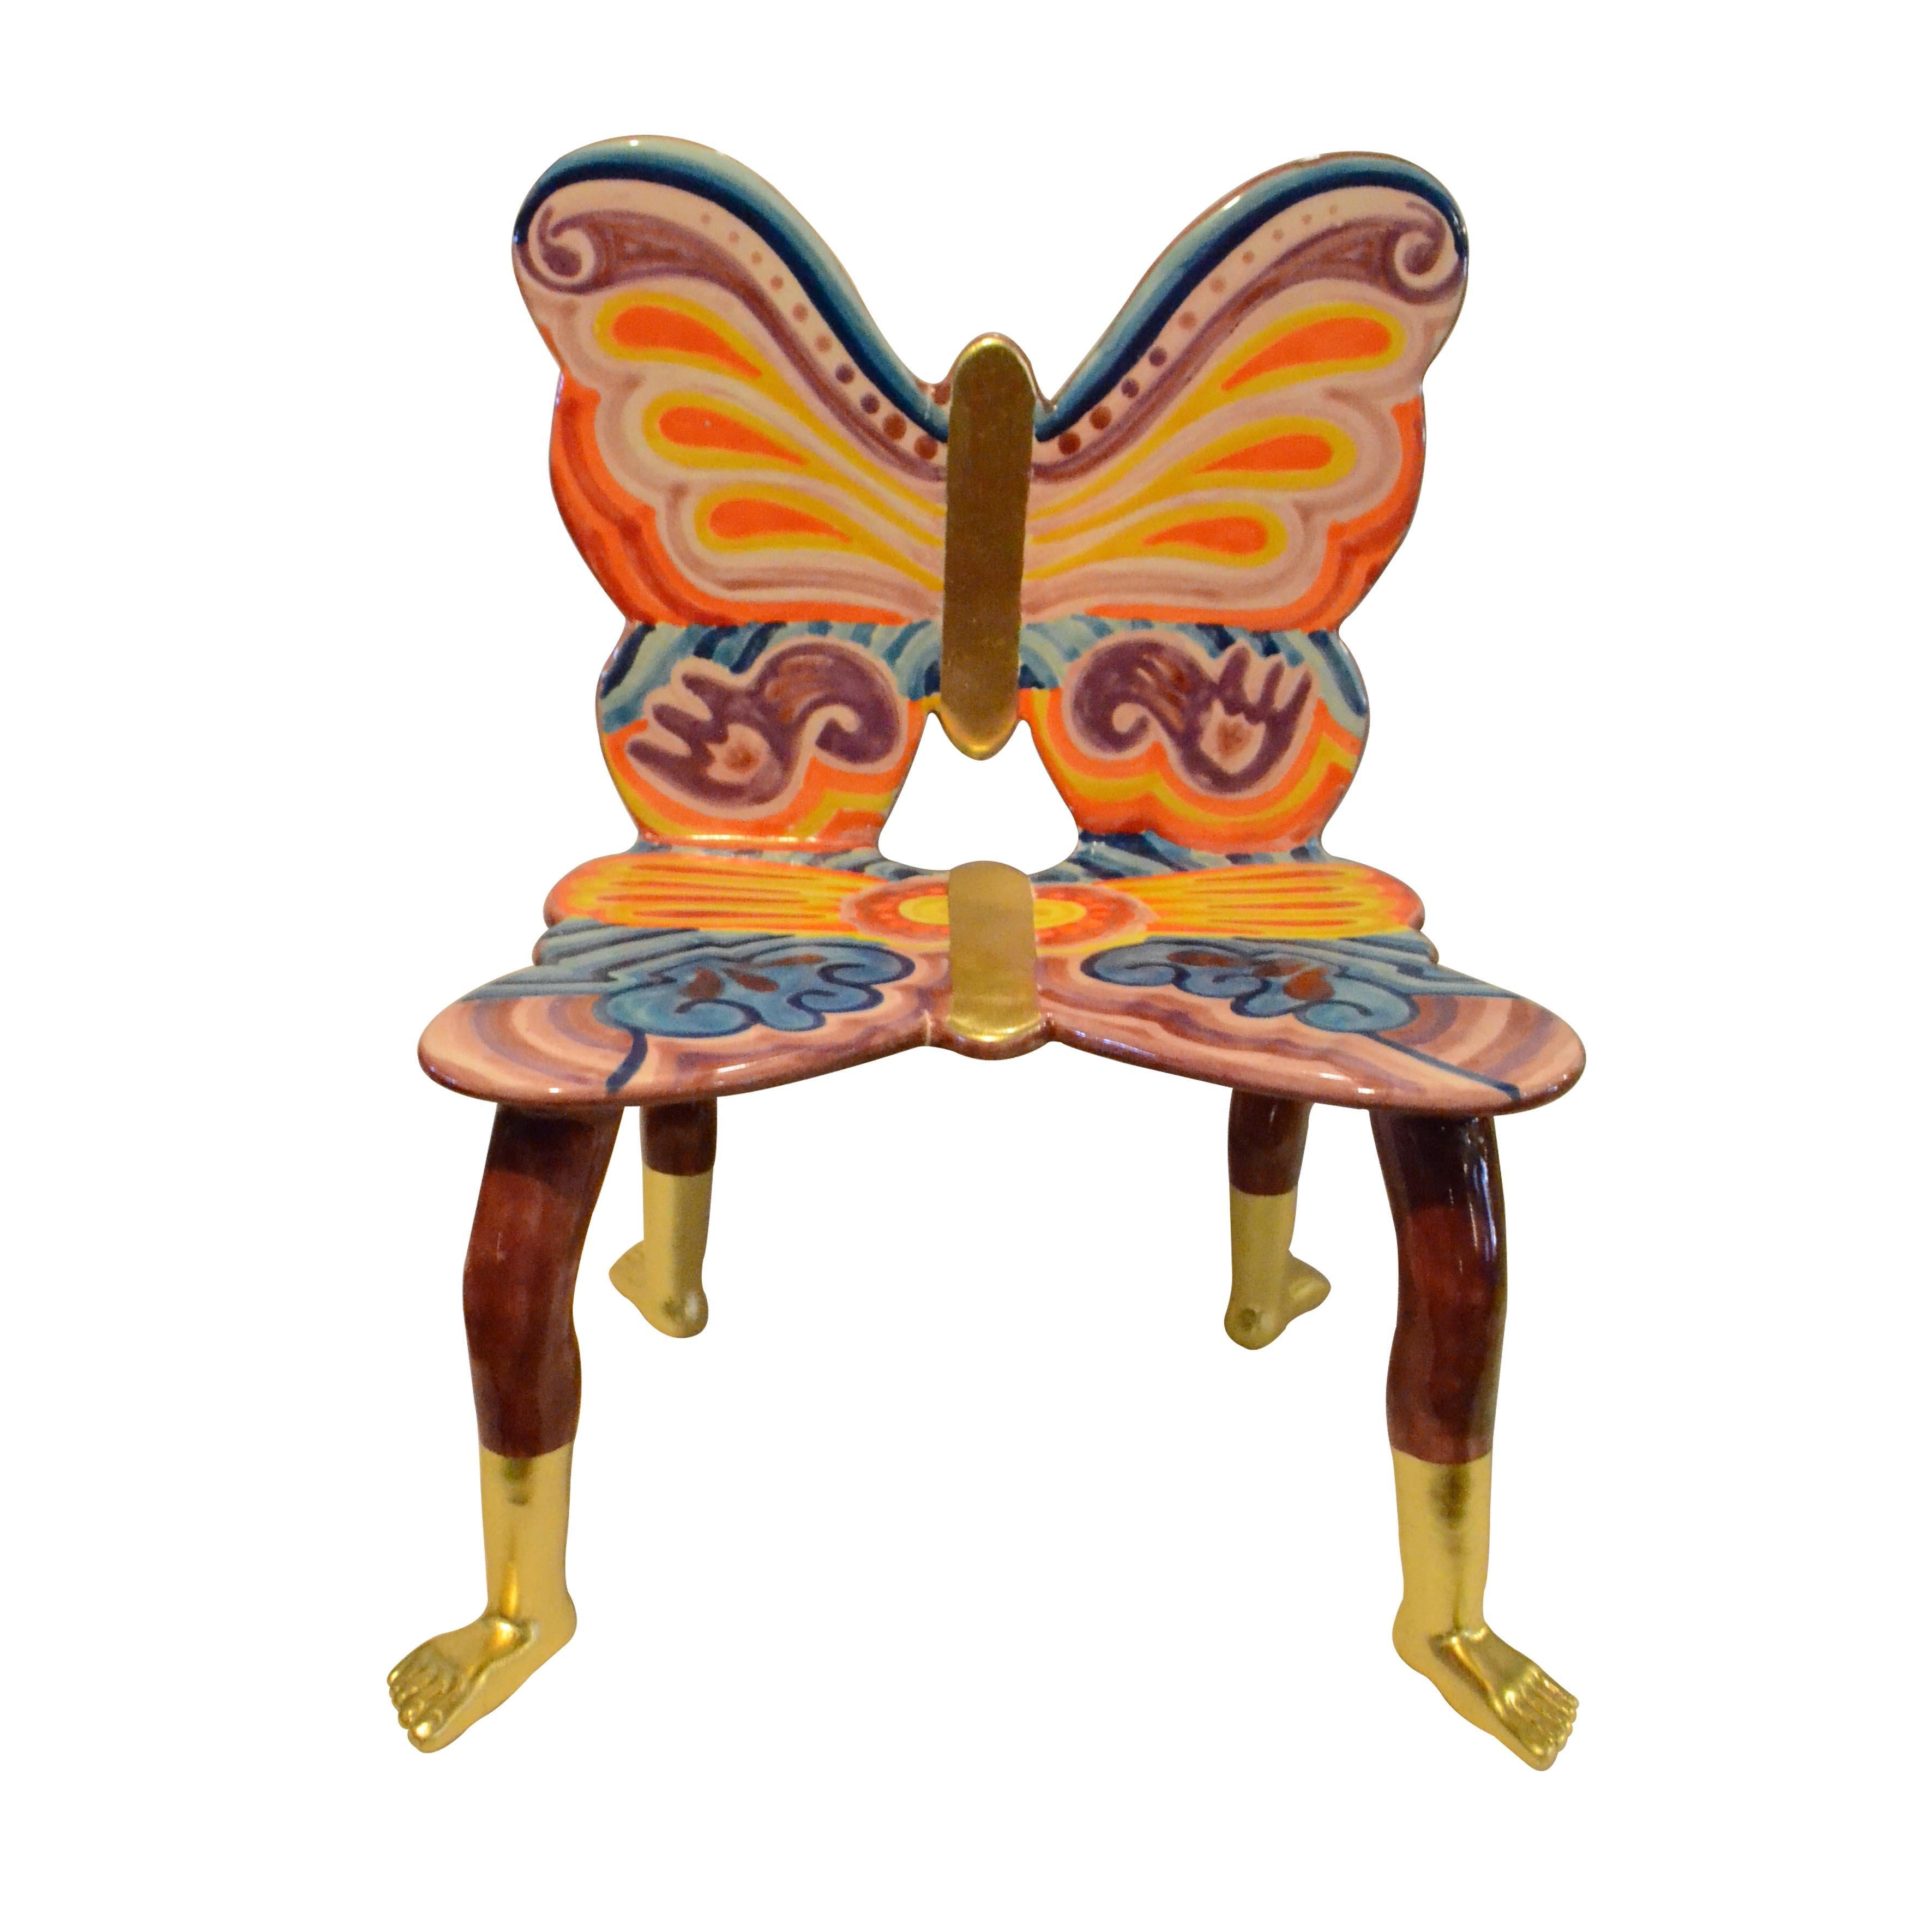 Pedro Friedeberg butterfly chair. Hand painted ceramic sculpture in pink, violet, yellow, blue and orange with 22-karat gold painting details.

Pedro Friedeberg is a Mexican artist and designer known by his surrealist work filled with lines and